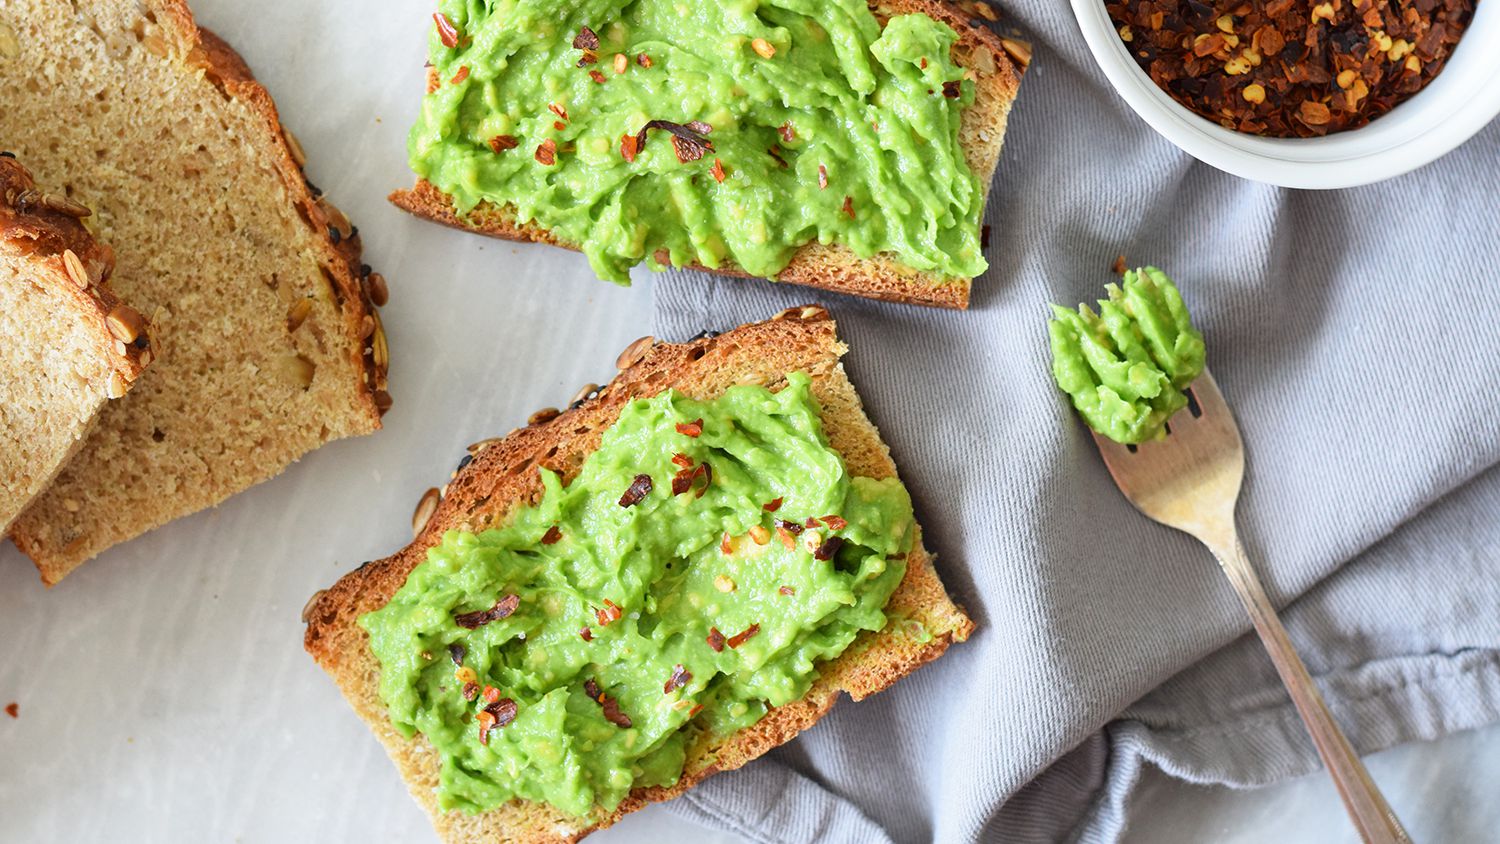 Prepare Avocado toast with These Top Tips